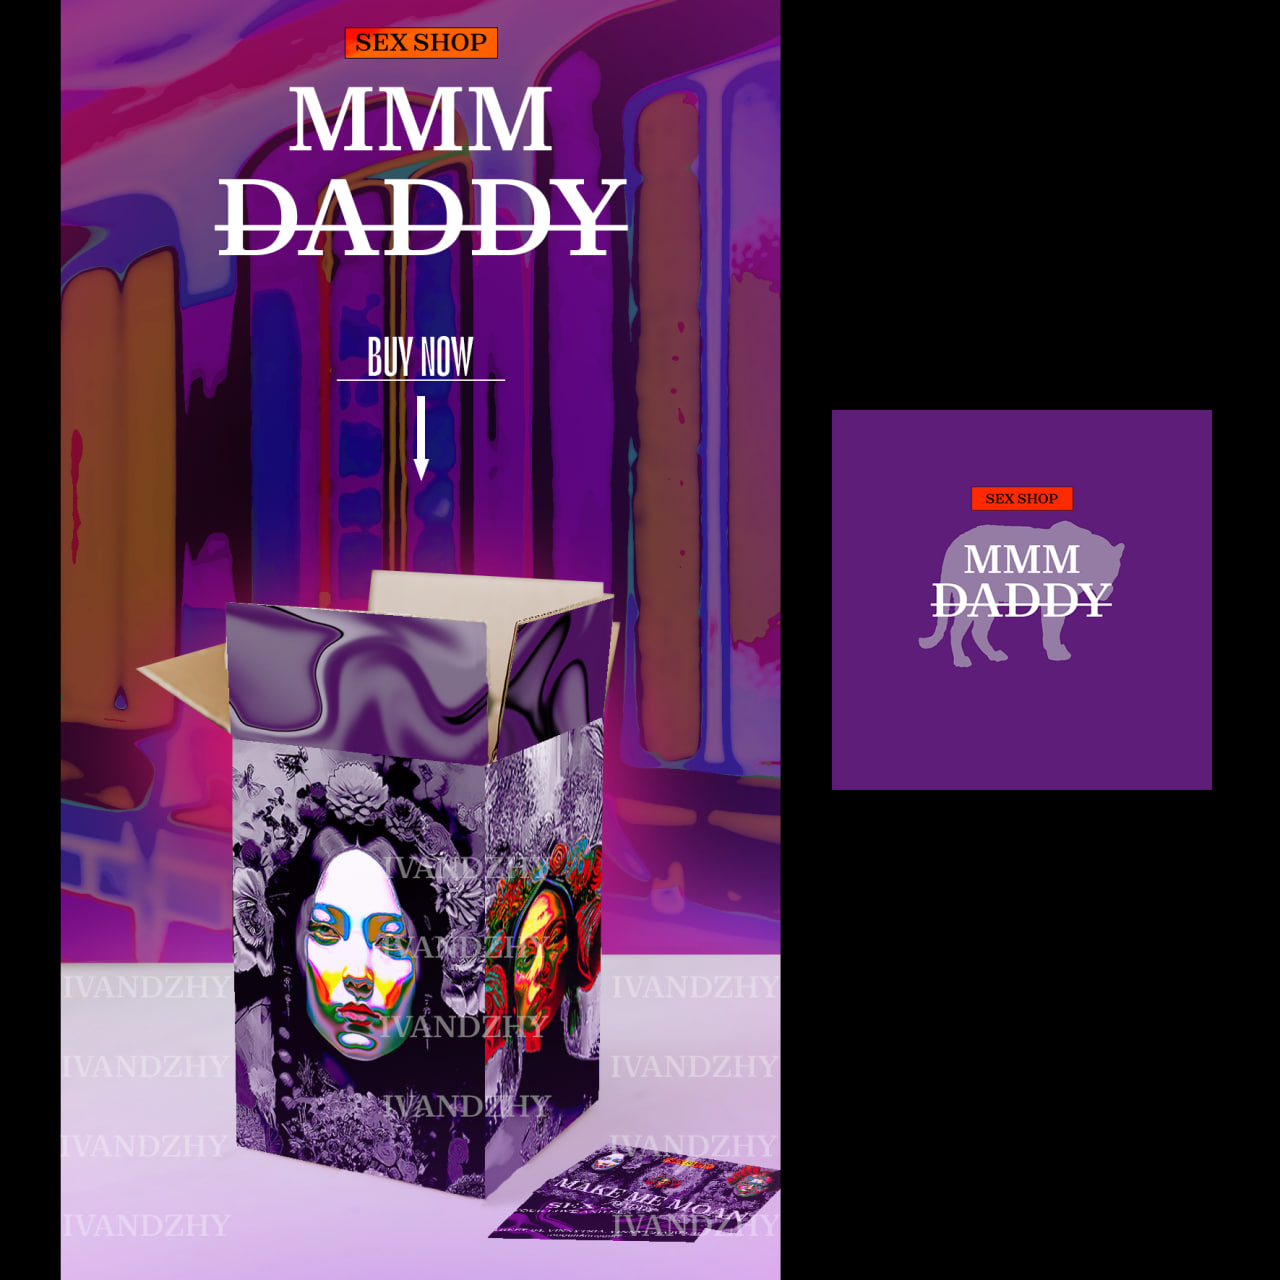 MMM Daddy (sexshop) preview image.